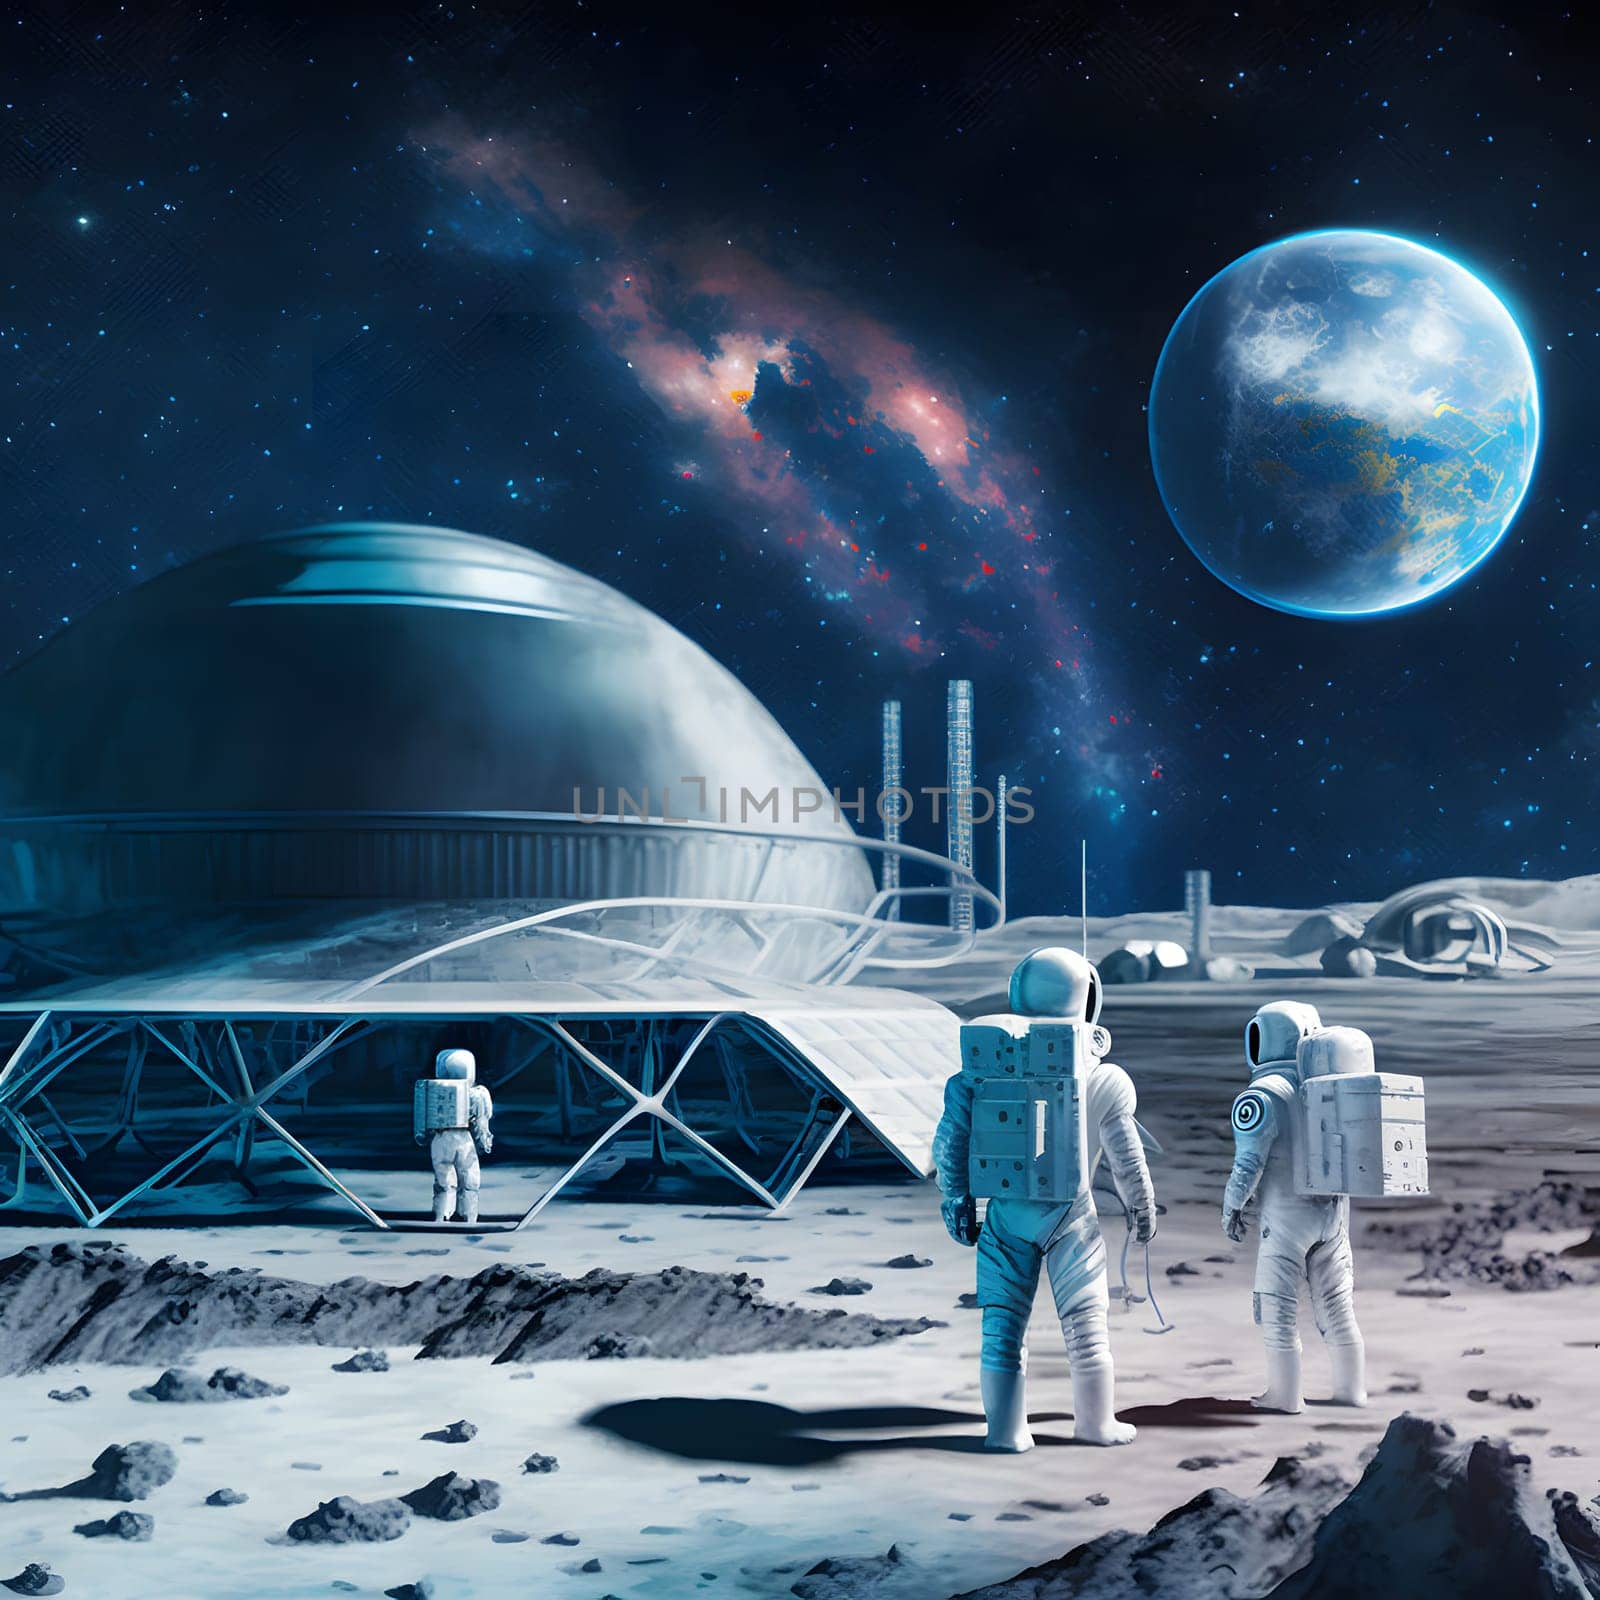 three austronauts in white space suits on moon surface with geodesic dome base in the background, neural network generated art by z1b